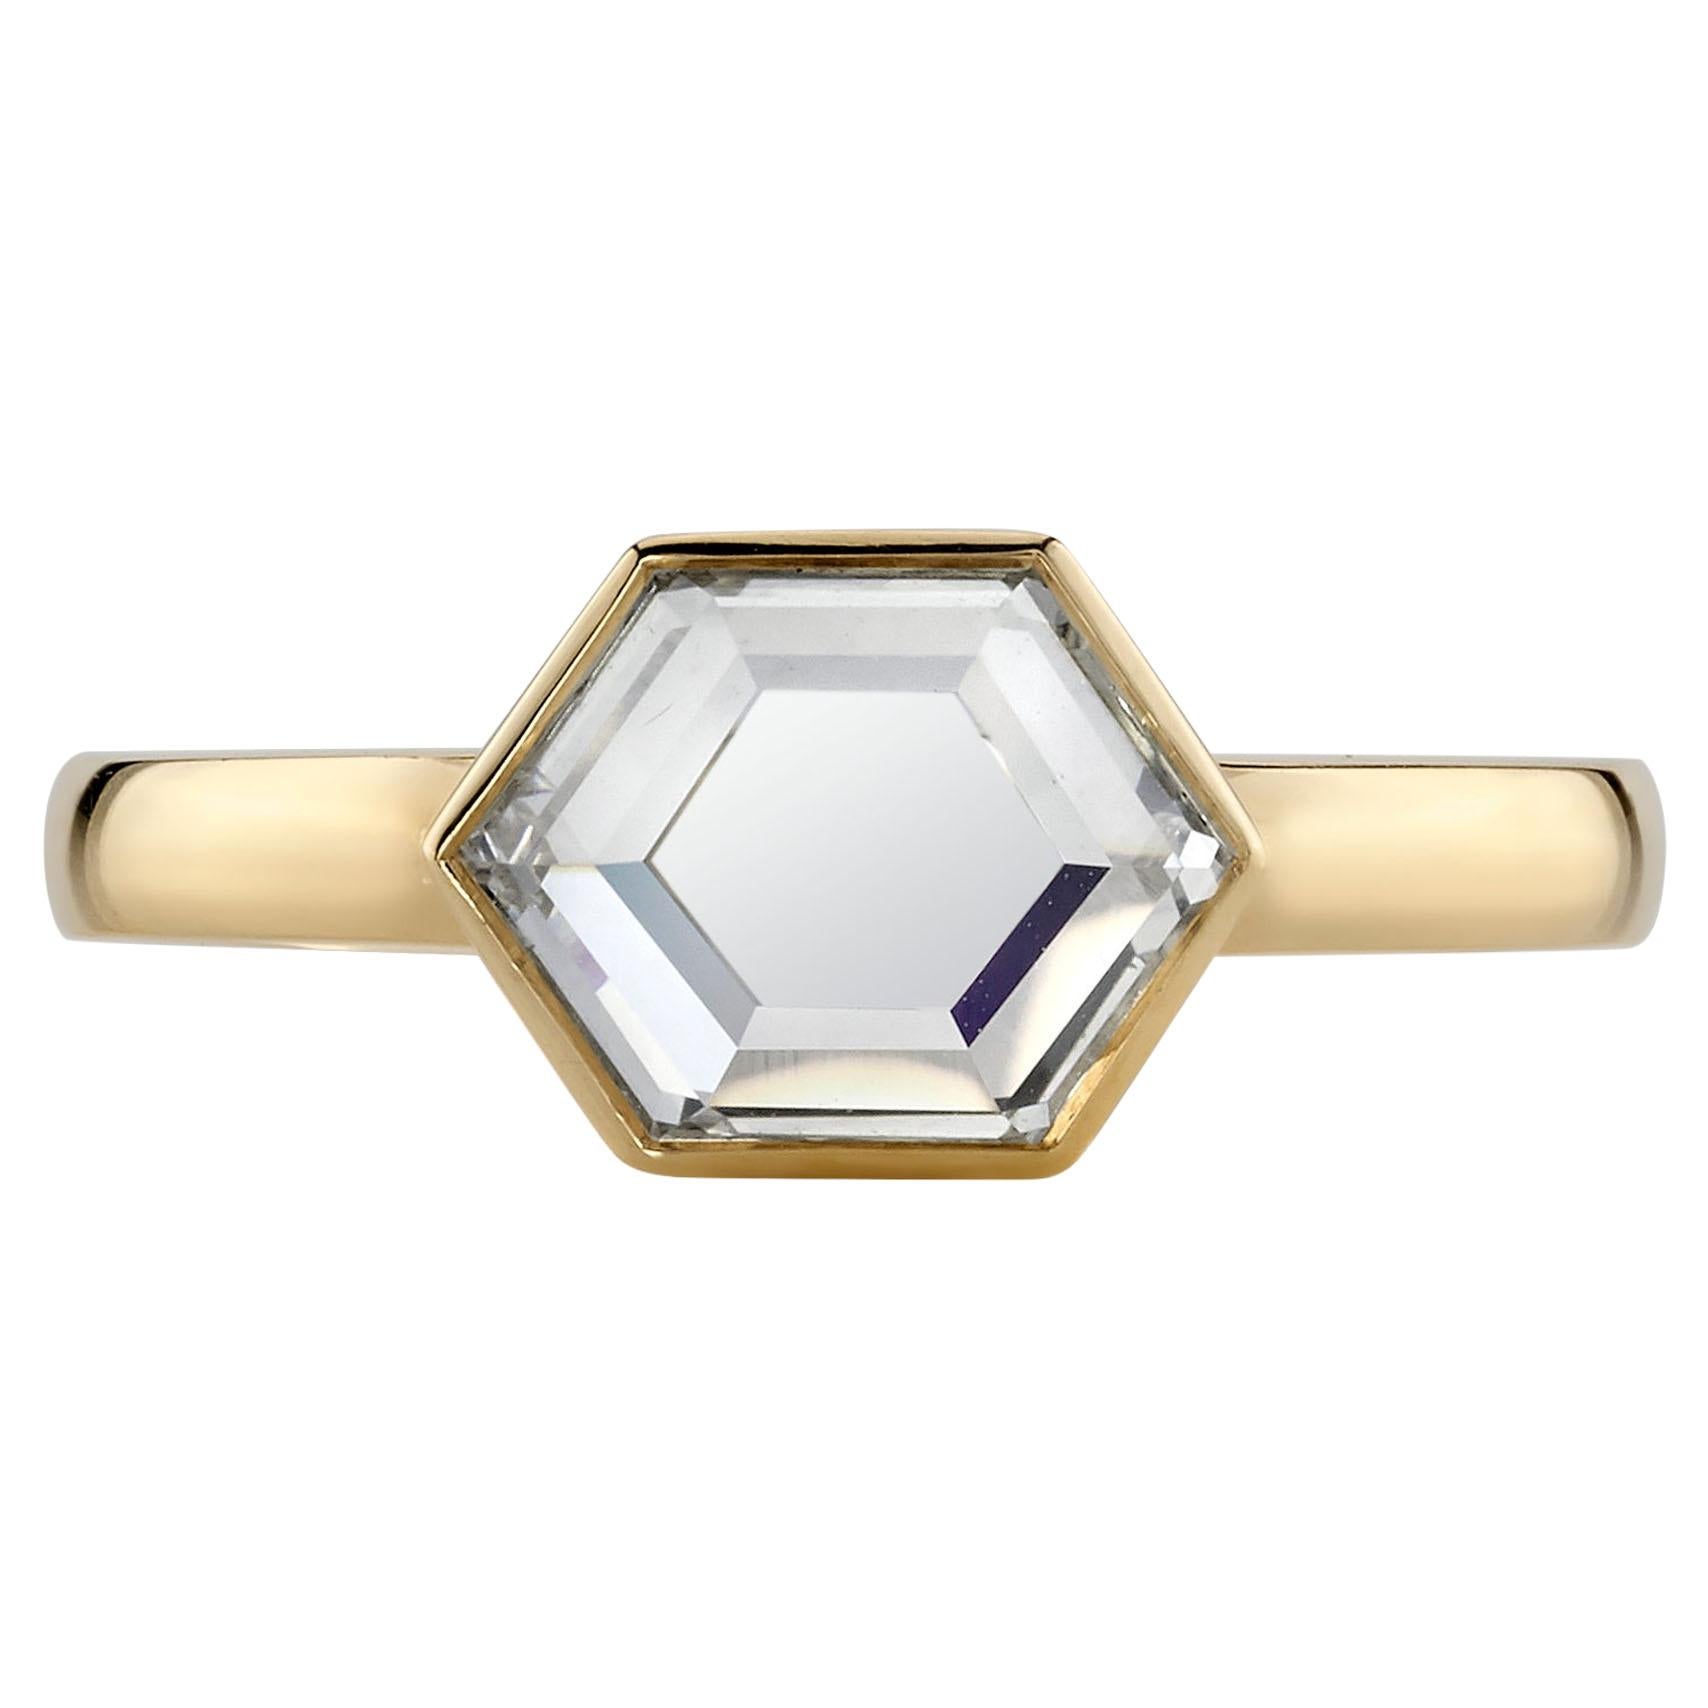 Handcrafted Wyler Portrait Cut Diamond Ring by Single Stone